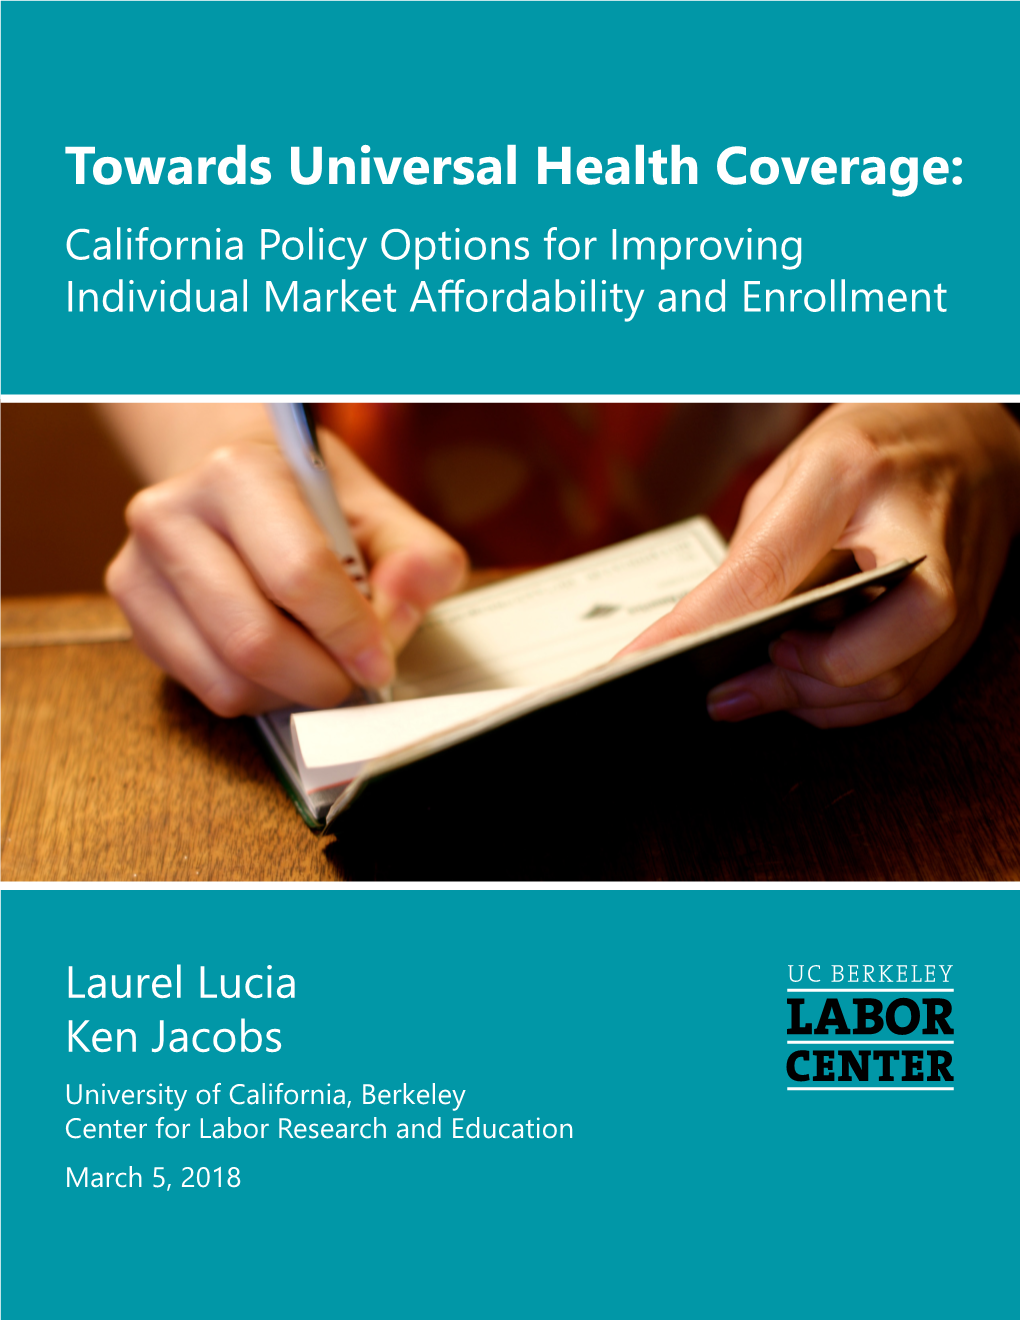 California Policy Options for Improving Individual Market Affordability and Enrollment